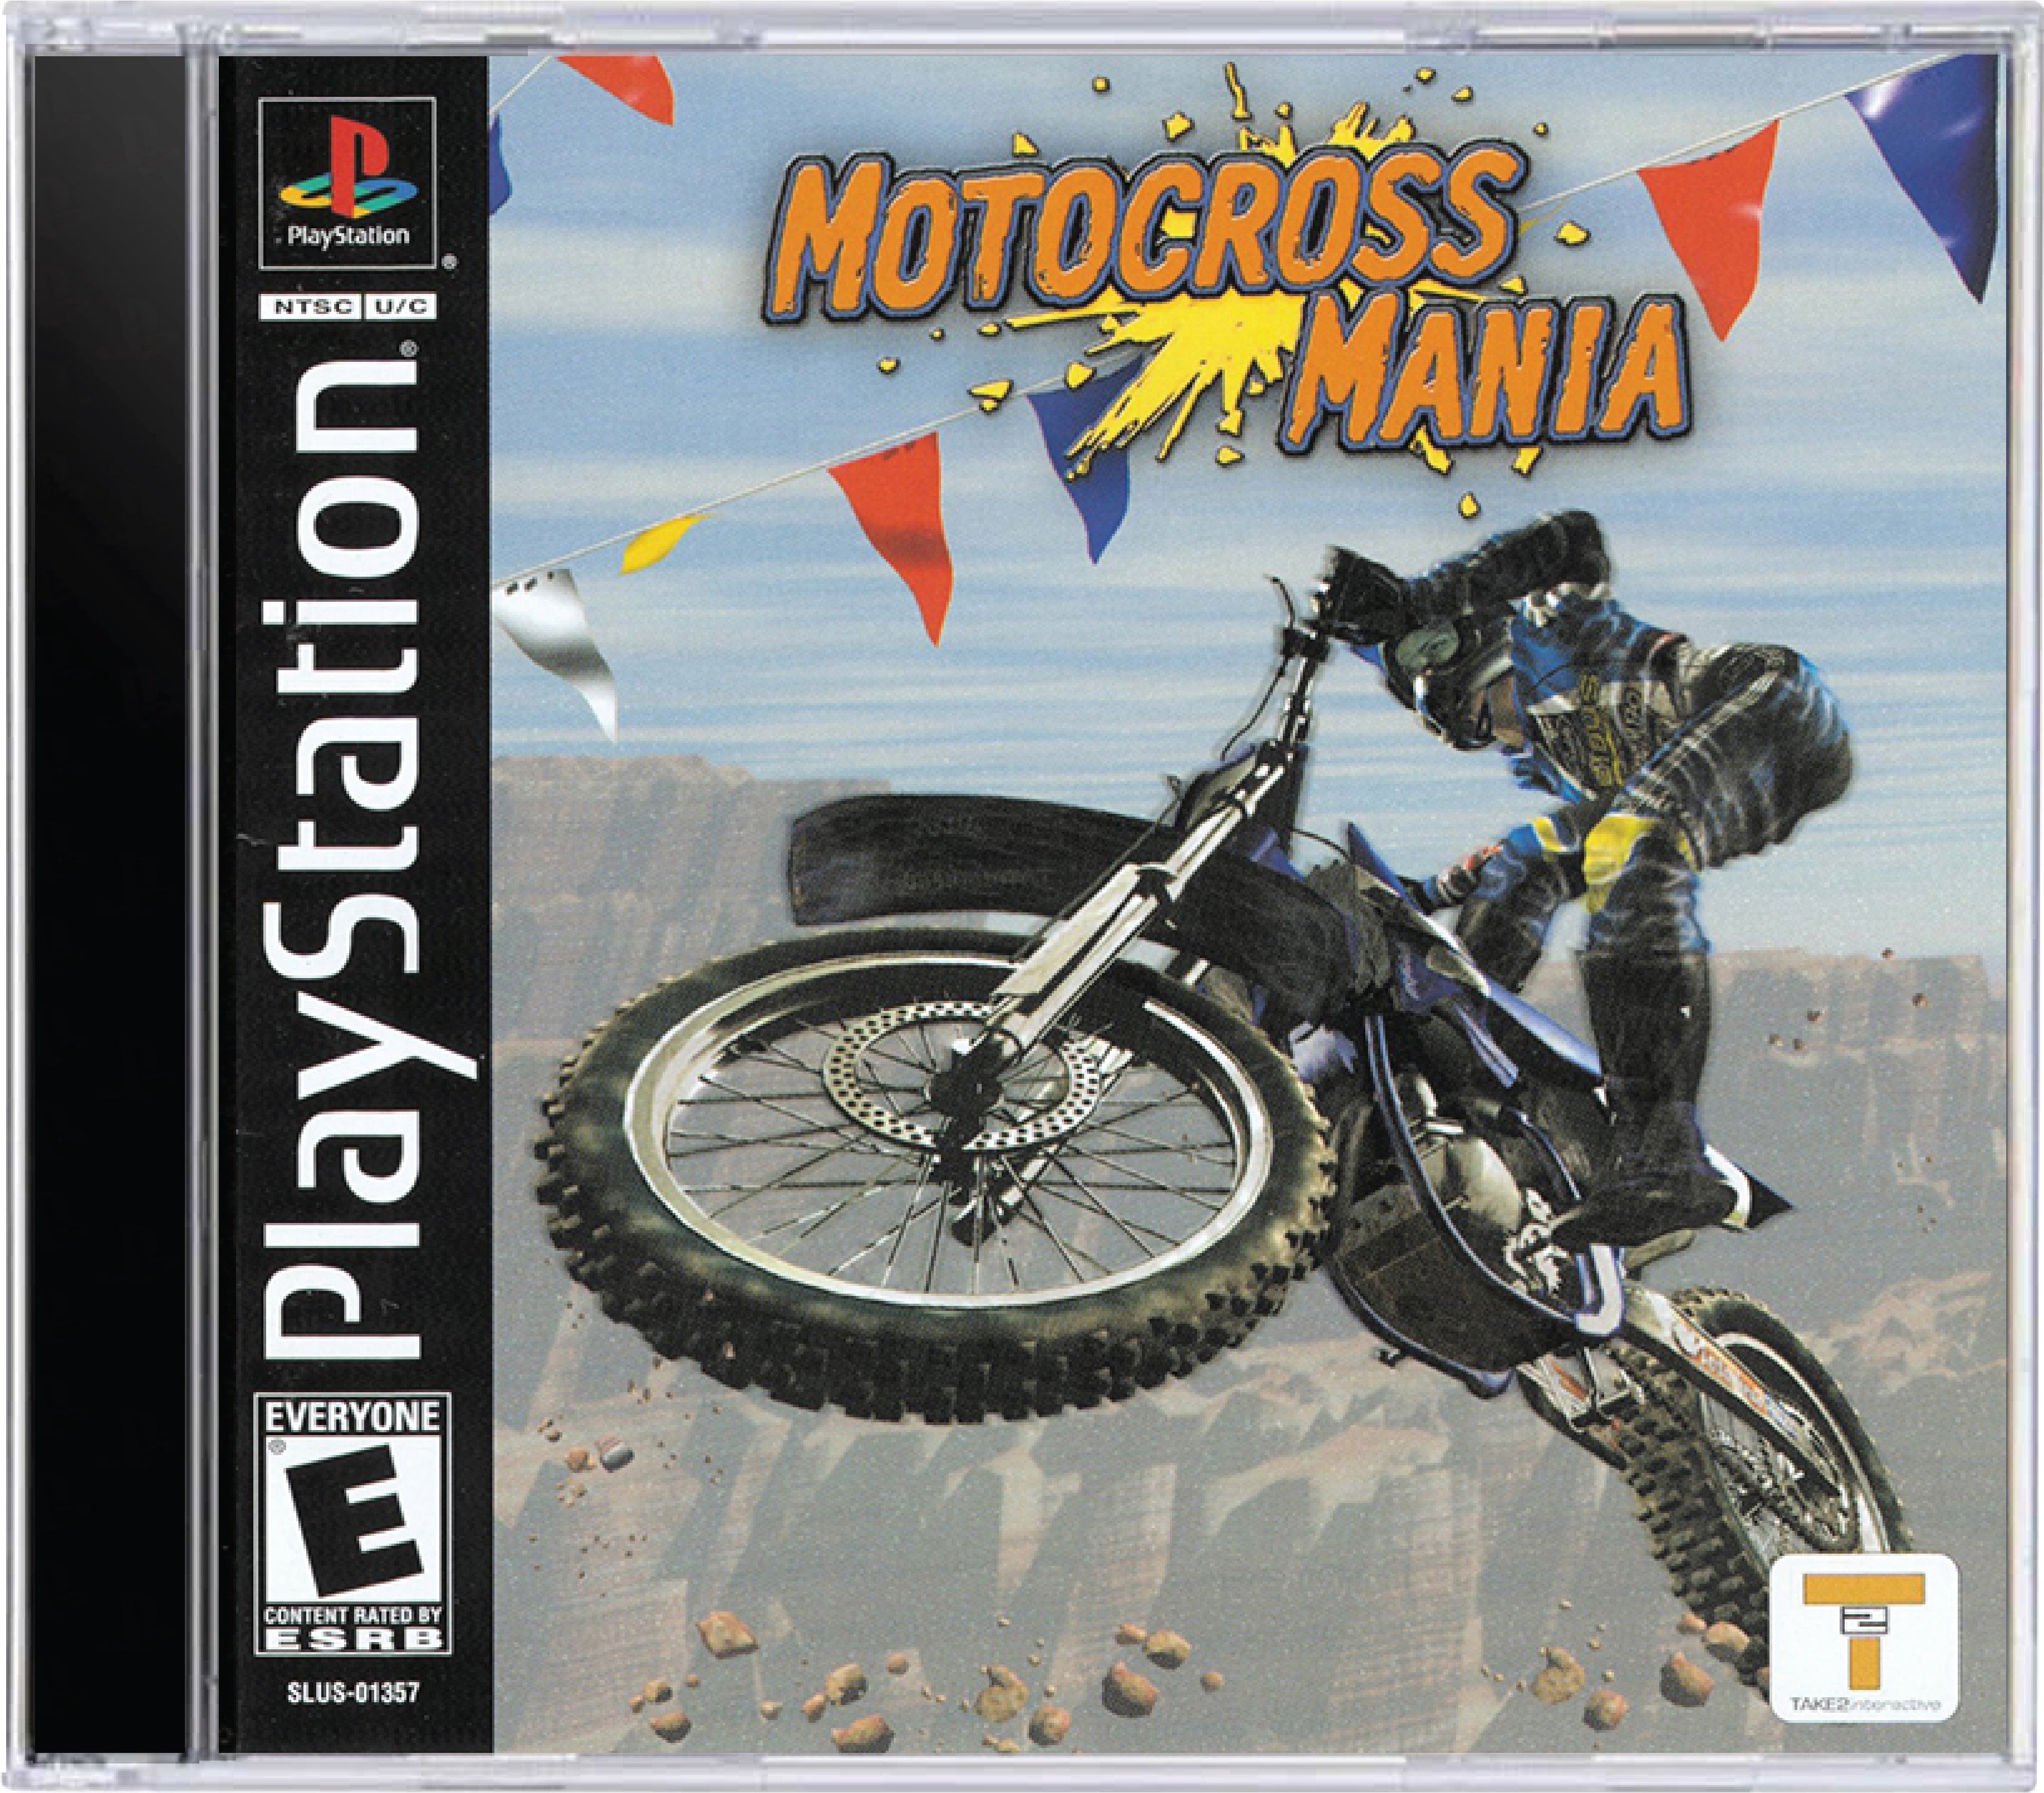 Motocross Mania Cover Art and Product Photo